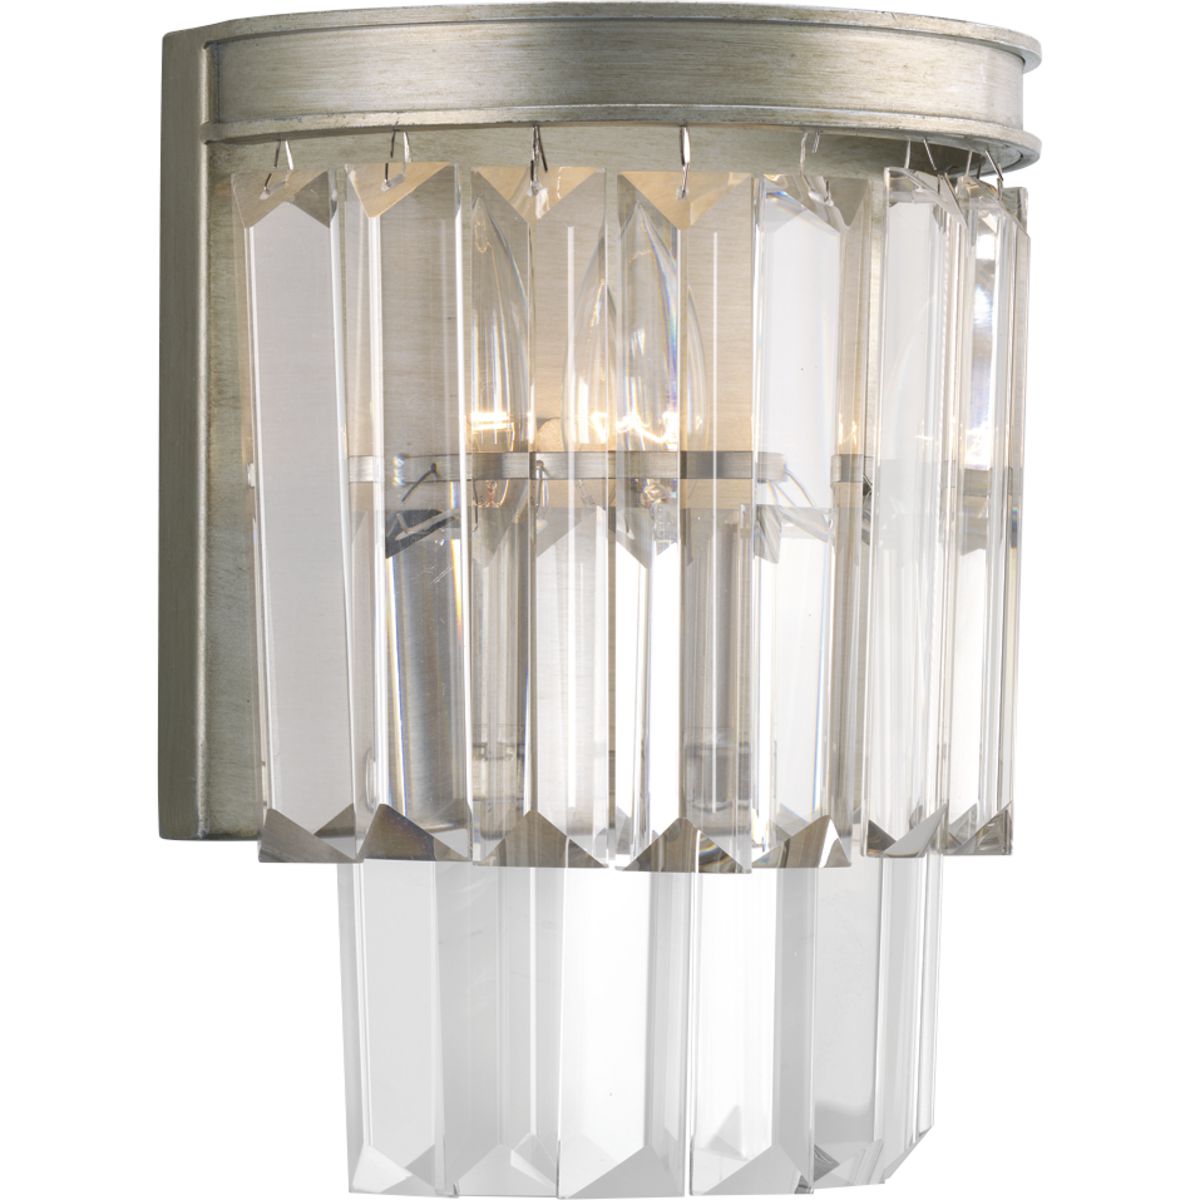 PROGRESS LIGHTING P7198-134 Silver Ridge Glimmer Collection Two-Light Wall Sconce